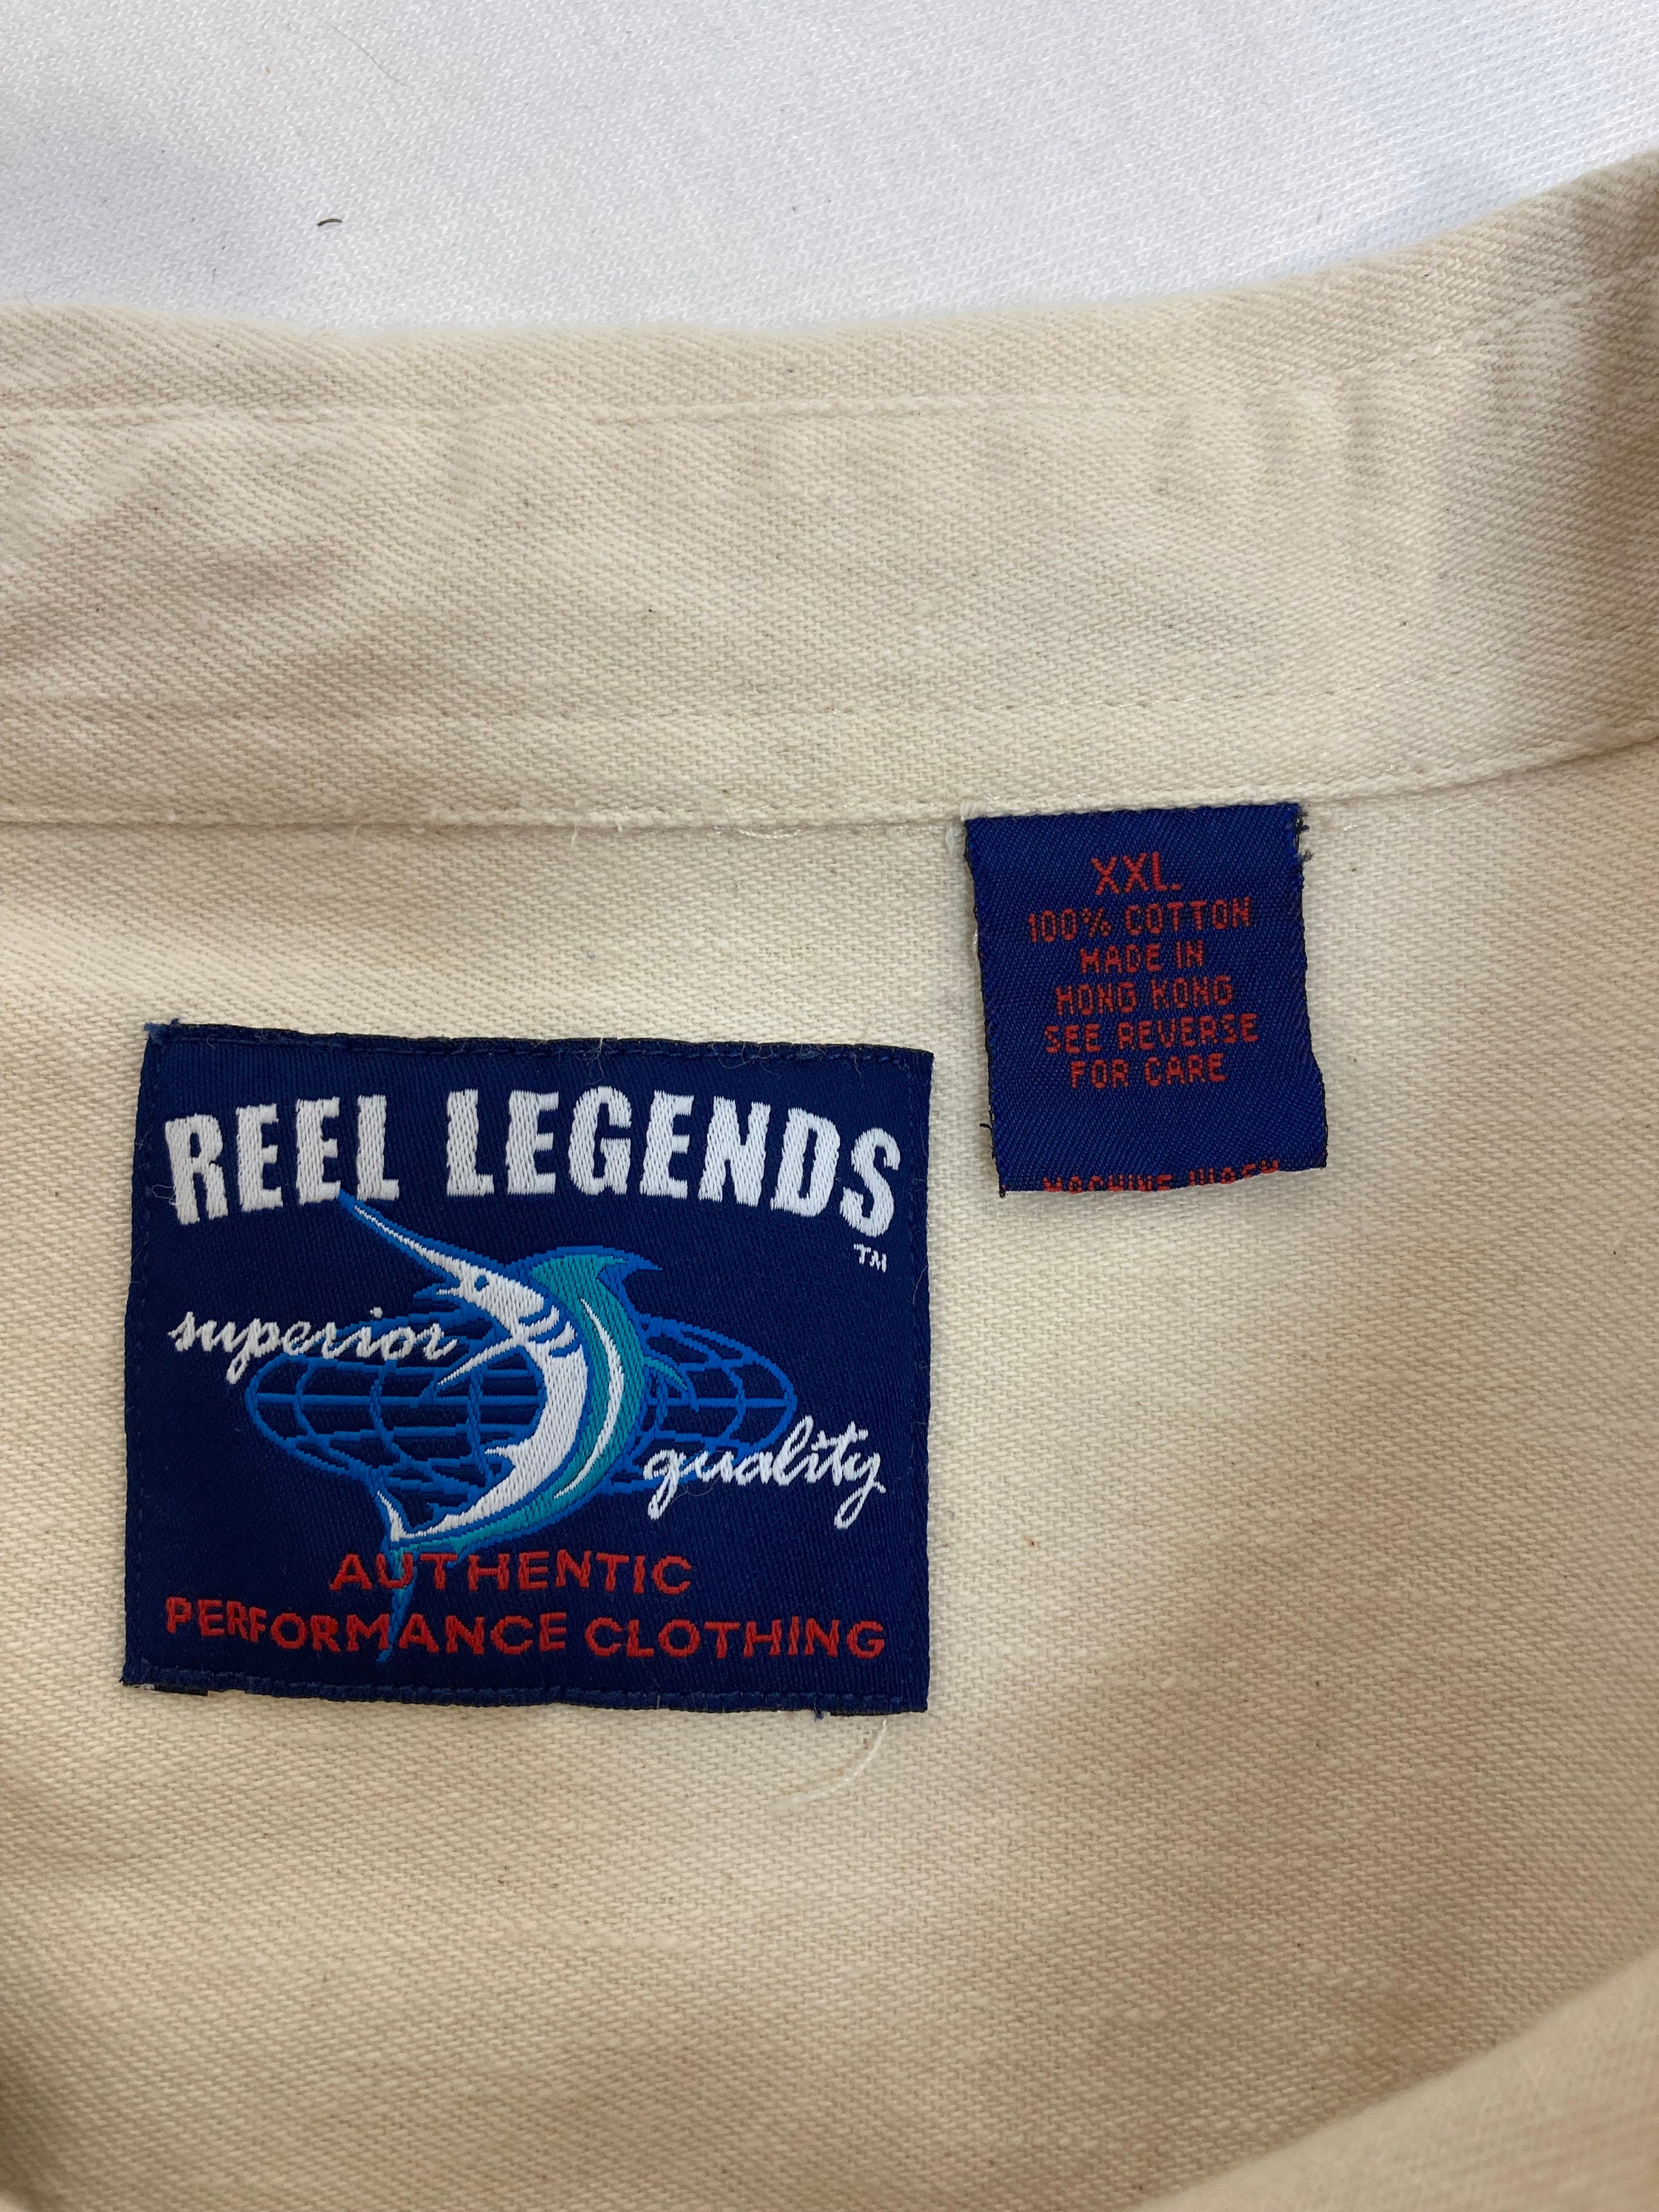 Buy Men's Reel Legends Cotton Embroidered Fishing Shirt Long